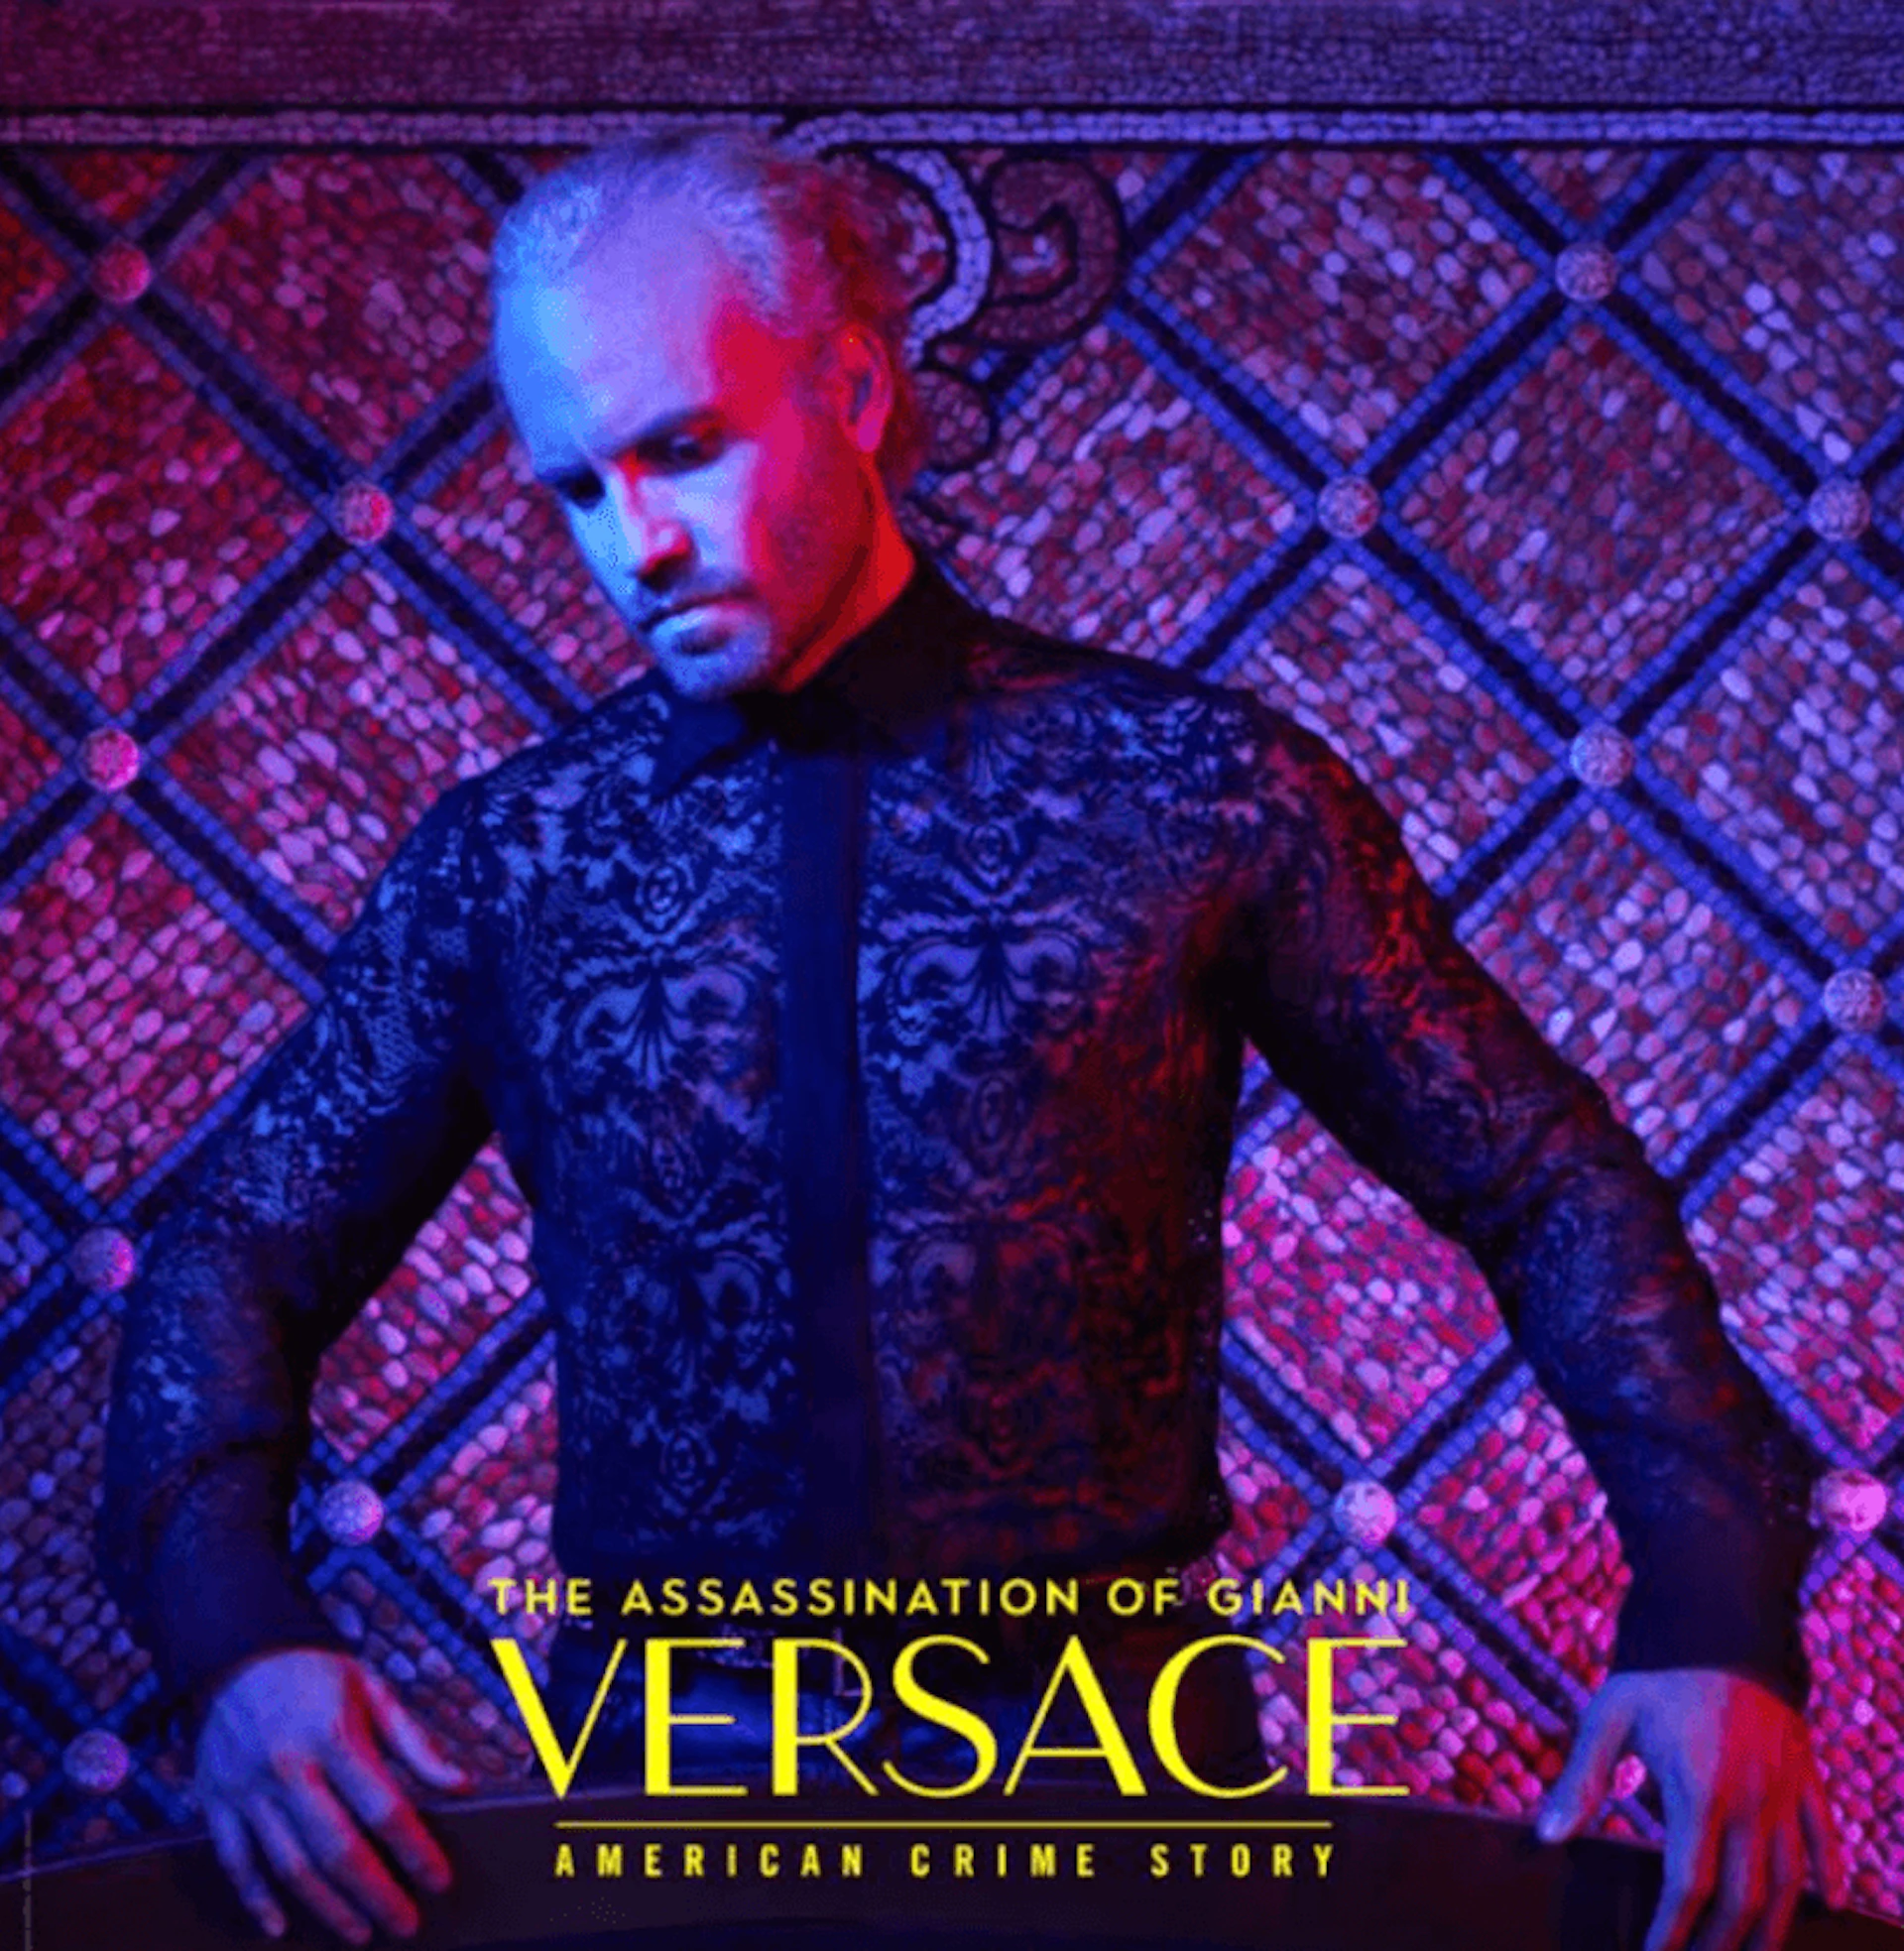 The Assassination of Gianni Versace - International versioning and dubbing